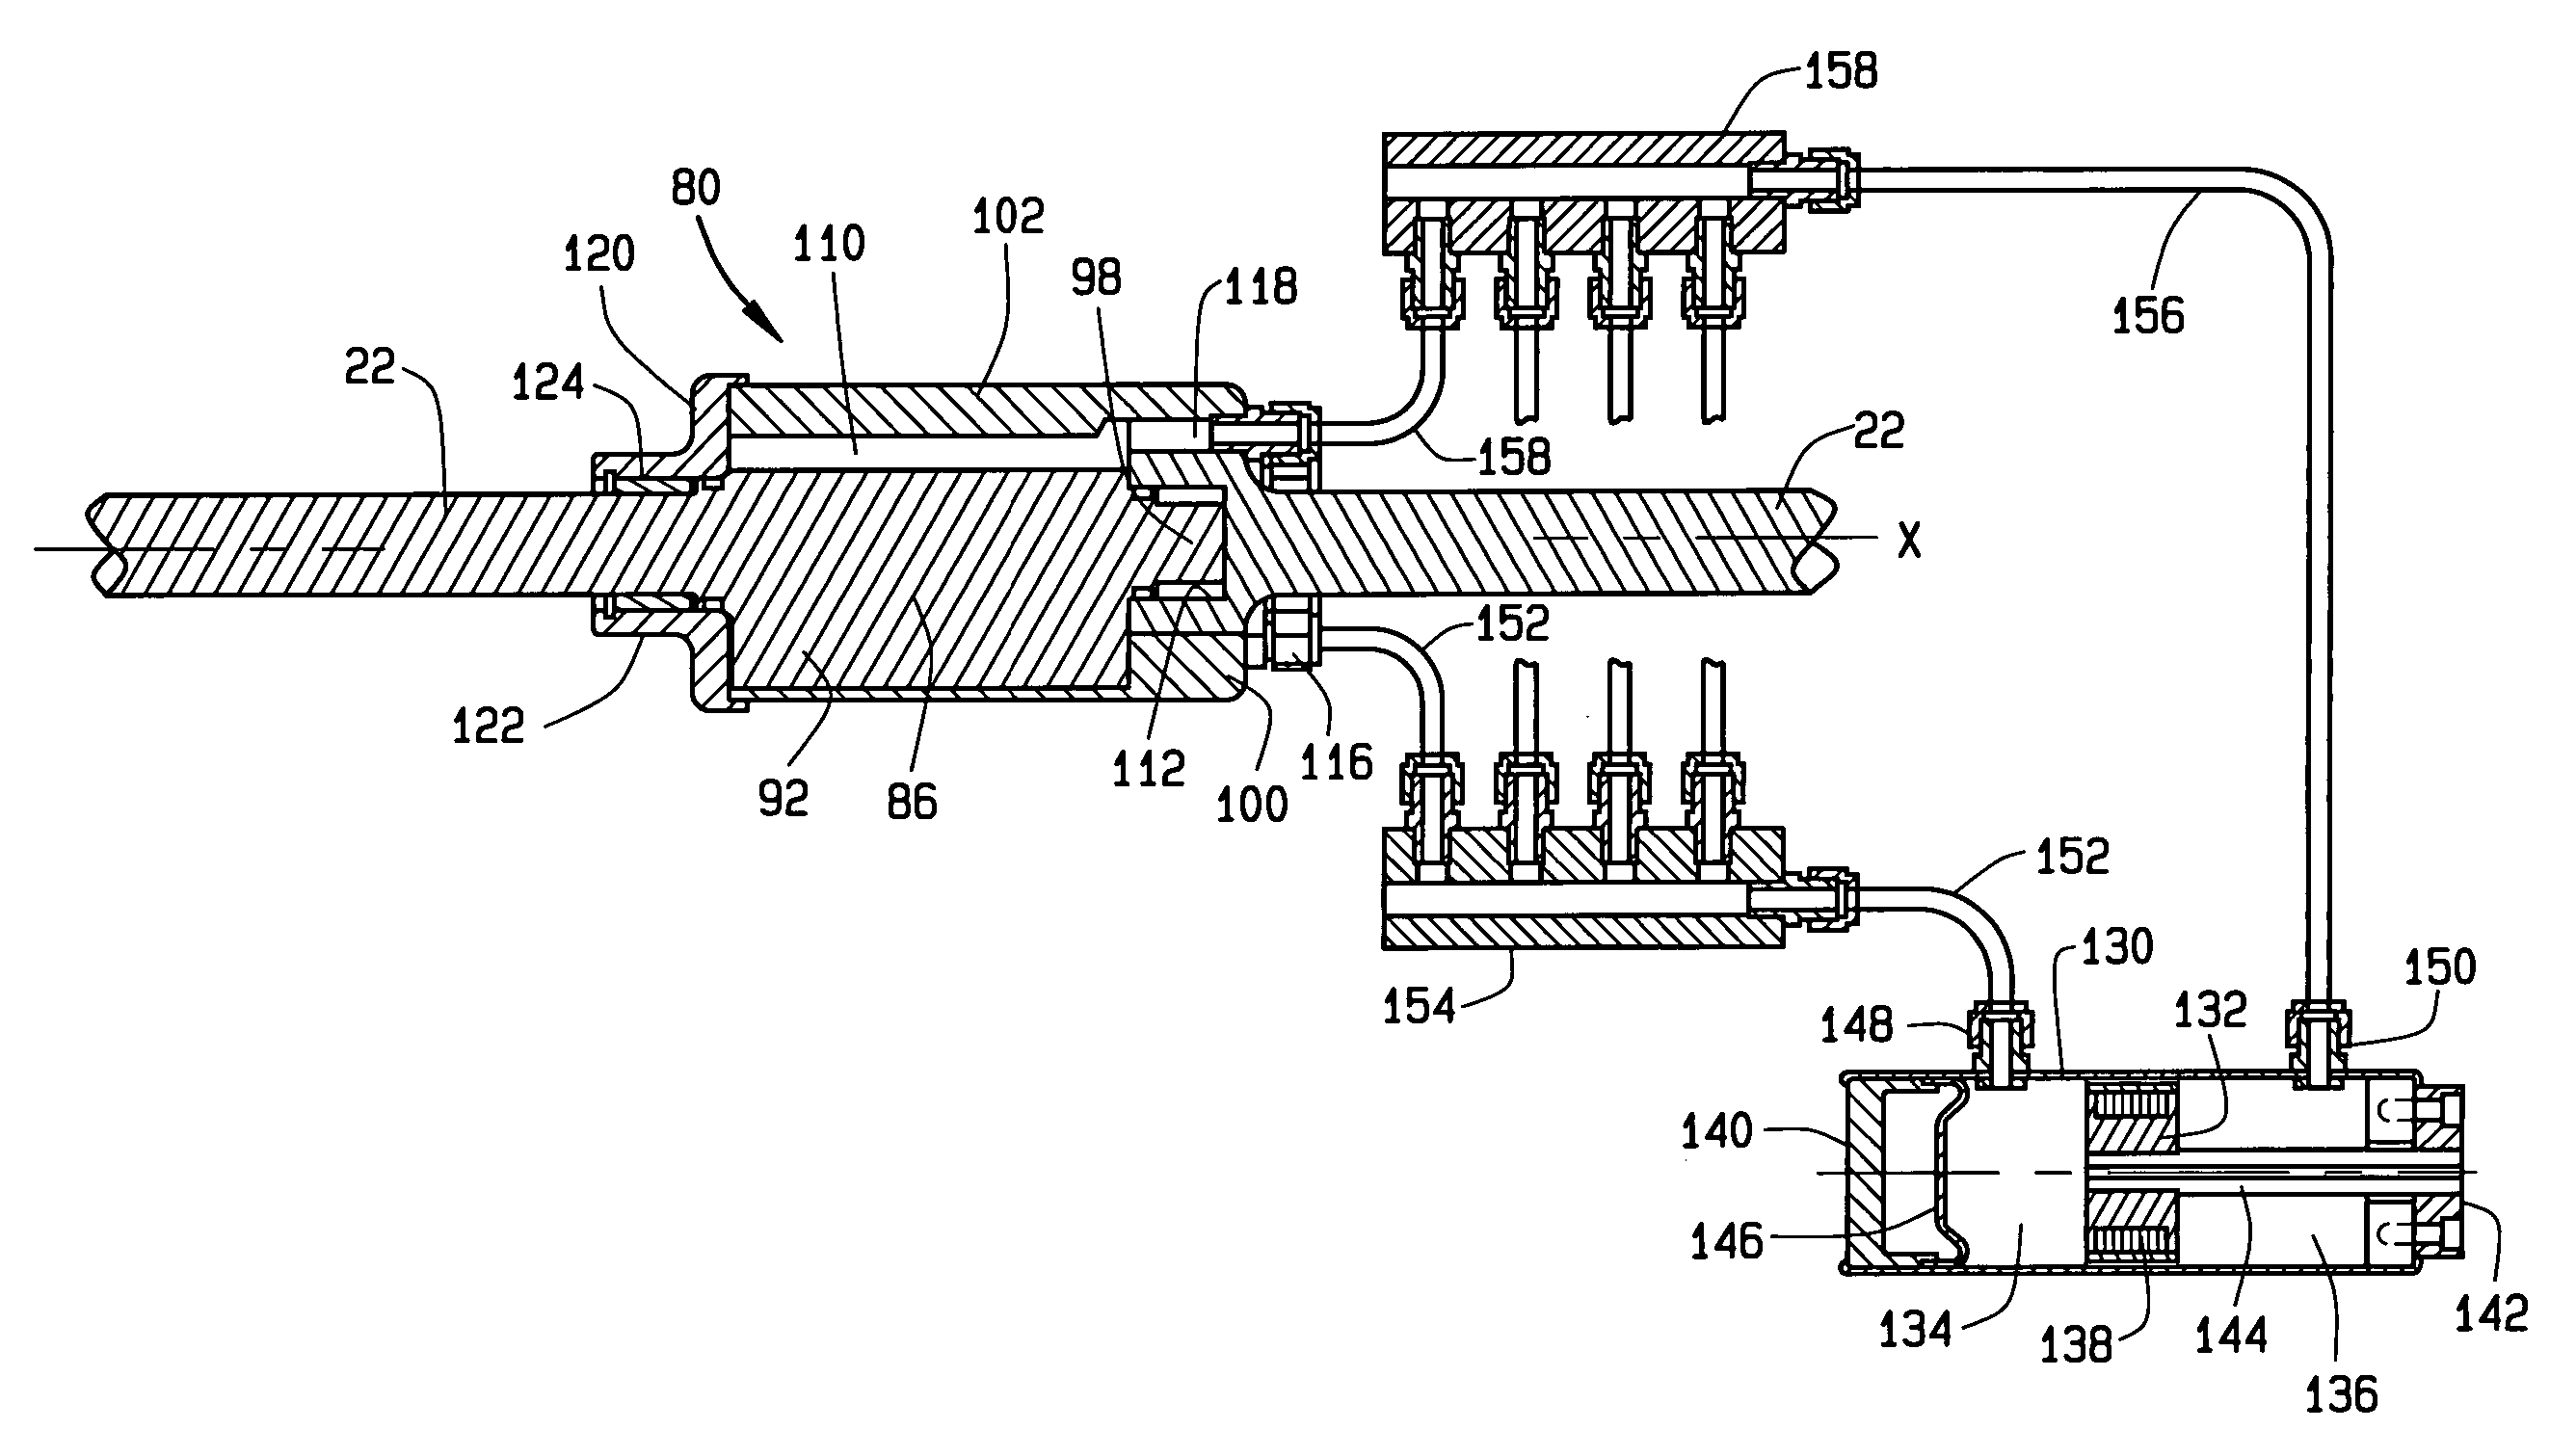 Stabilizer bar with variable torsional stiffness